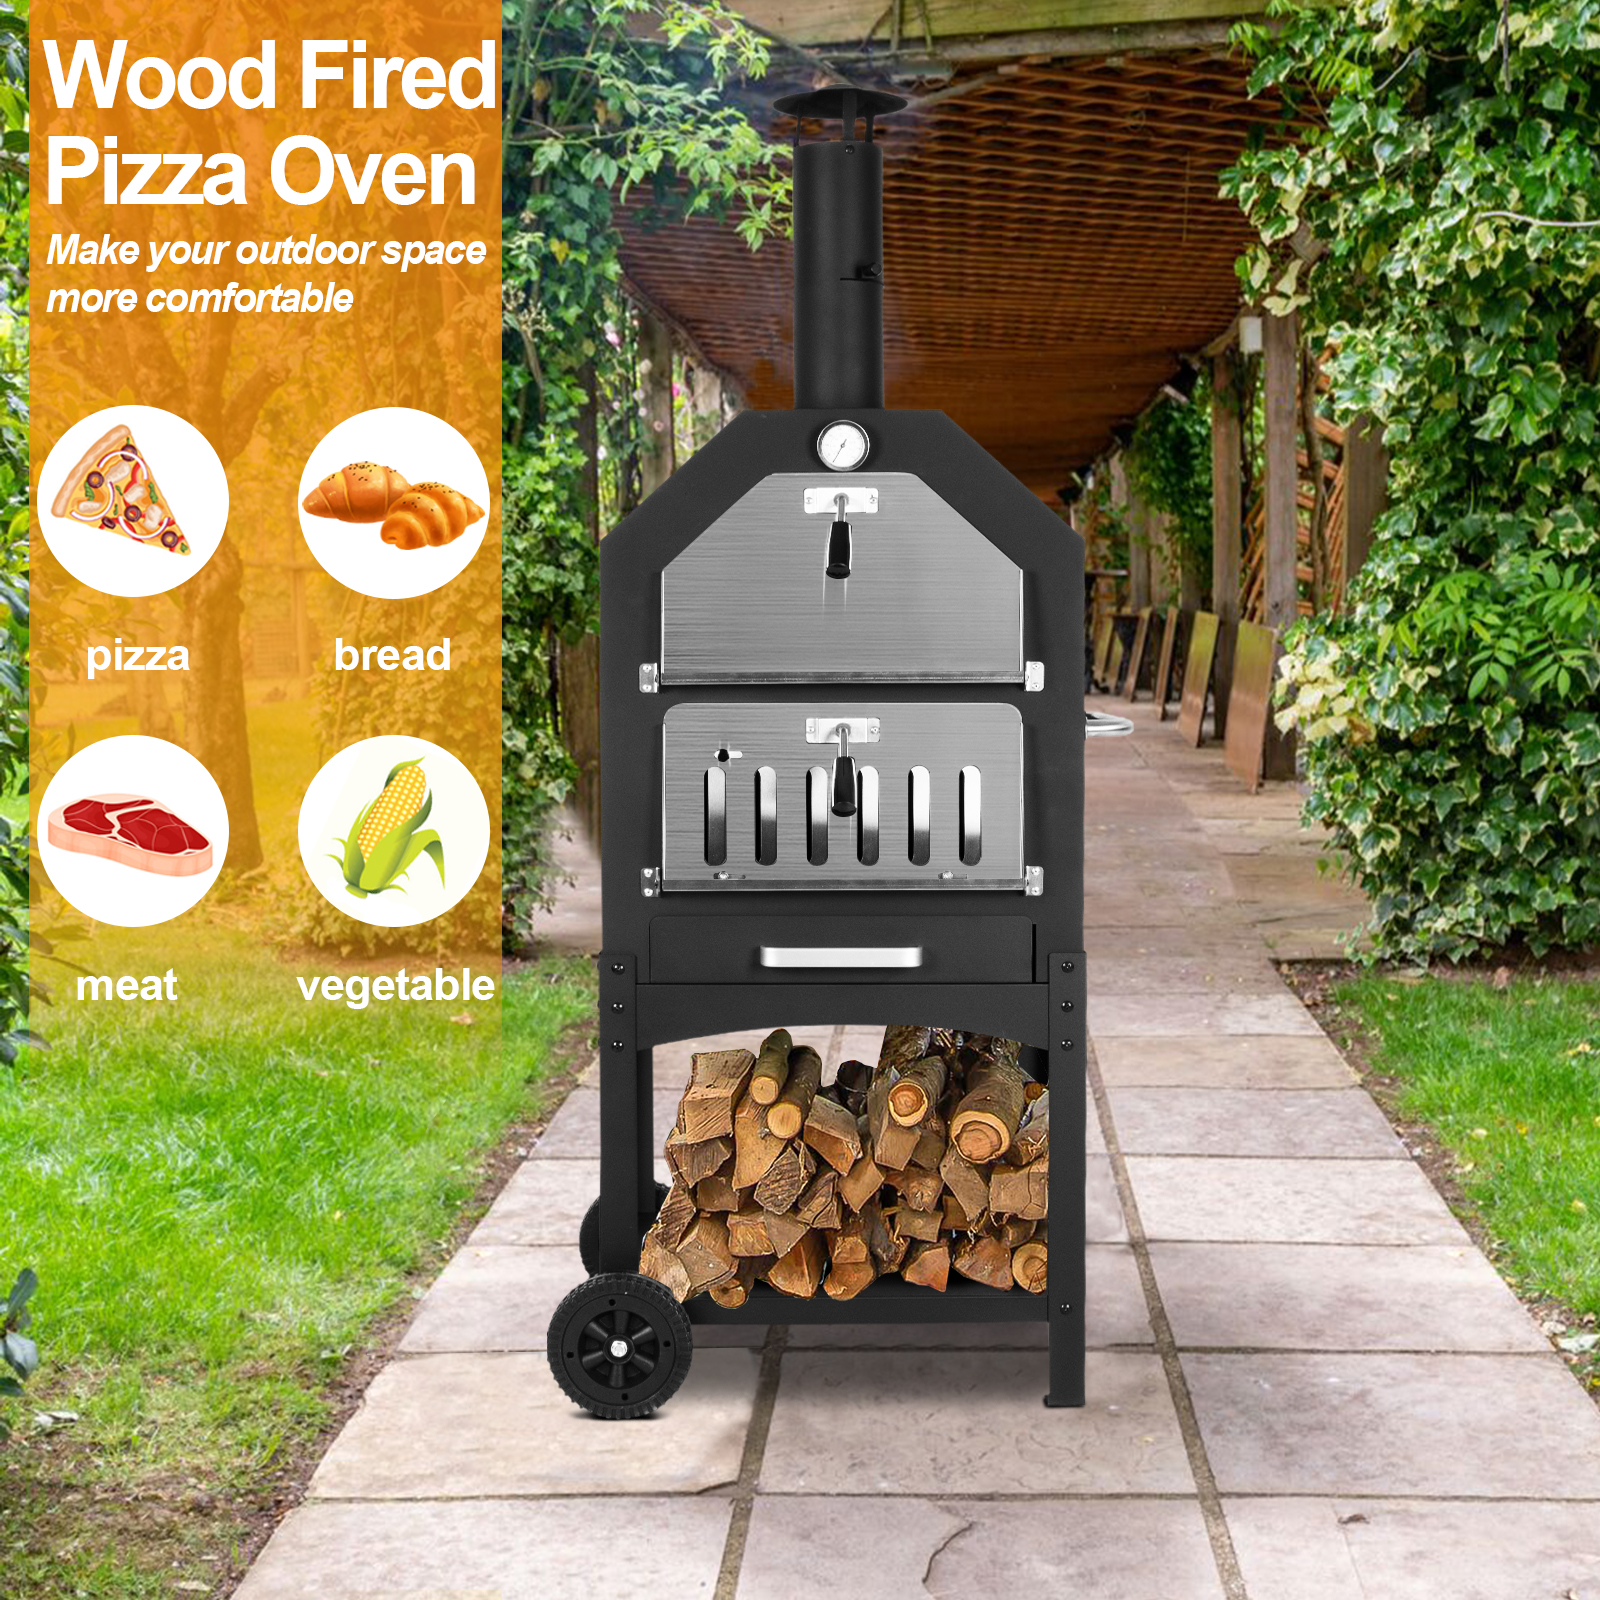 Outdoor Pizza Oven Wood Fired Pizza Oven Patio Portable Pizza Maker Cooking Grill with Wheels Waterproof Cover - image 3 of 7